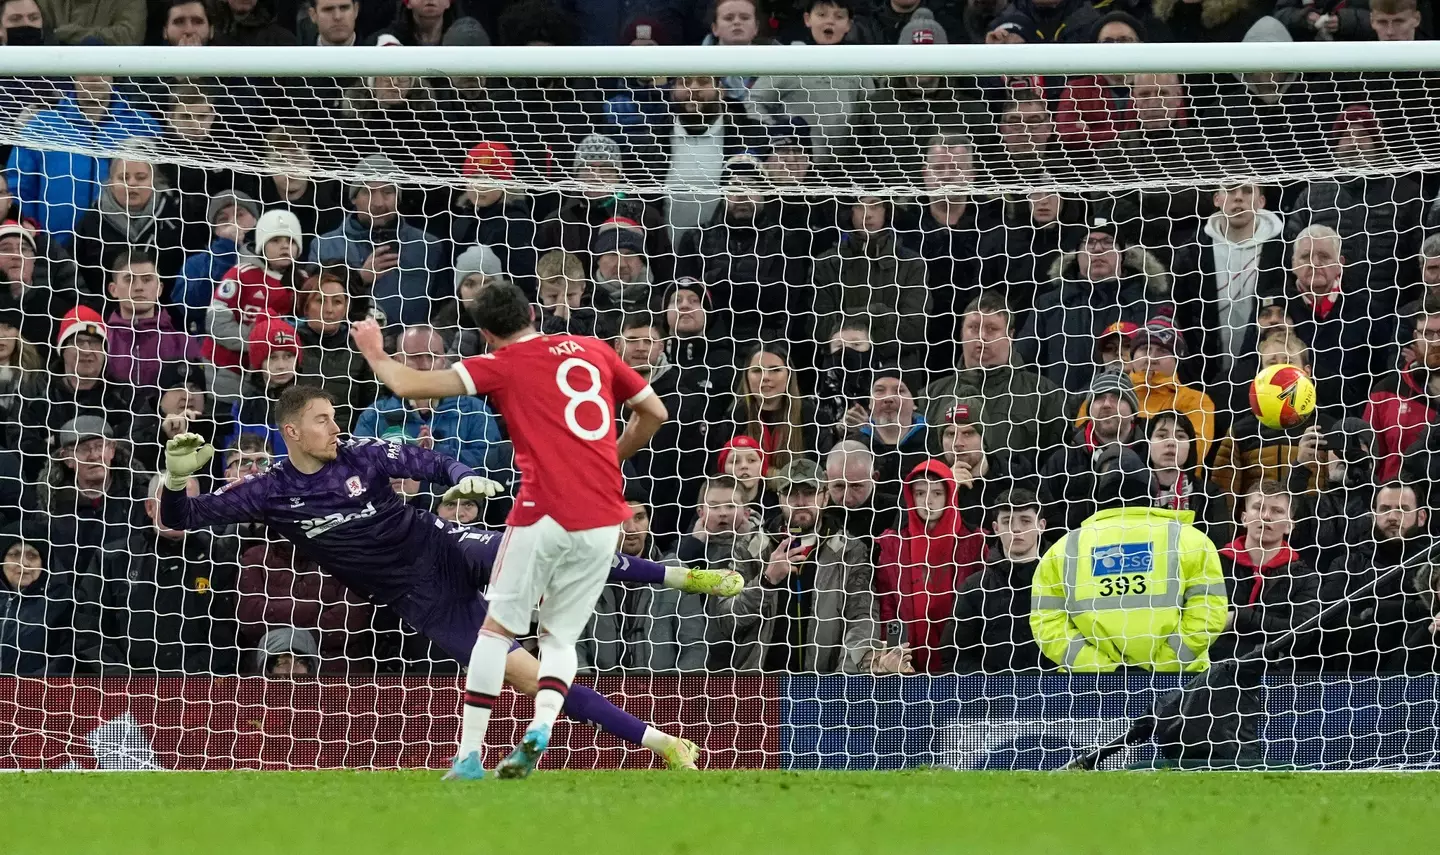 Mata did score his penalty against Boro. Image: PA Images